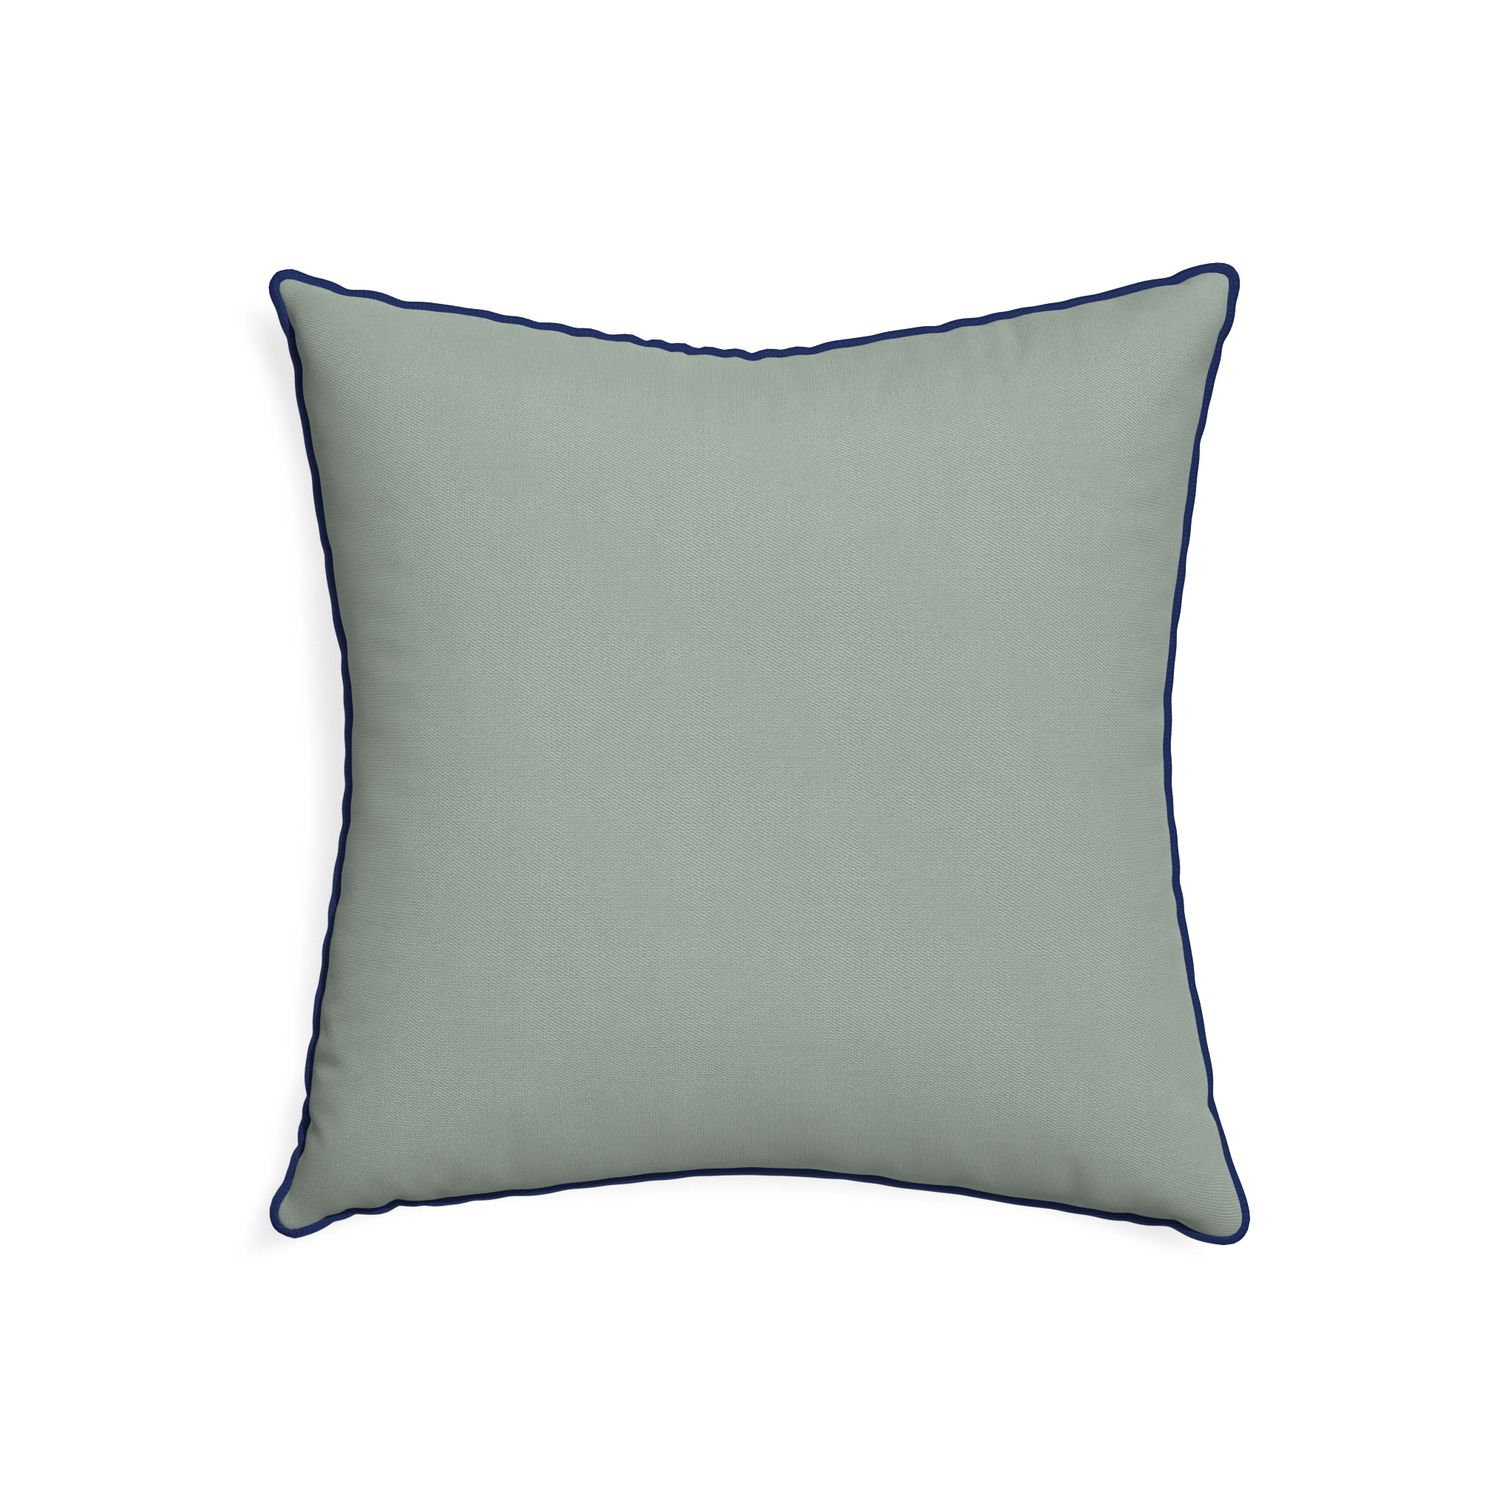 22-square sage custom sage green cottonpillow with midnight piping on white background